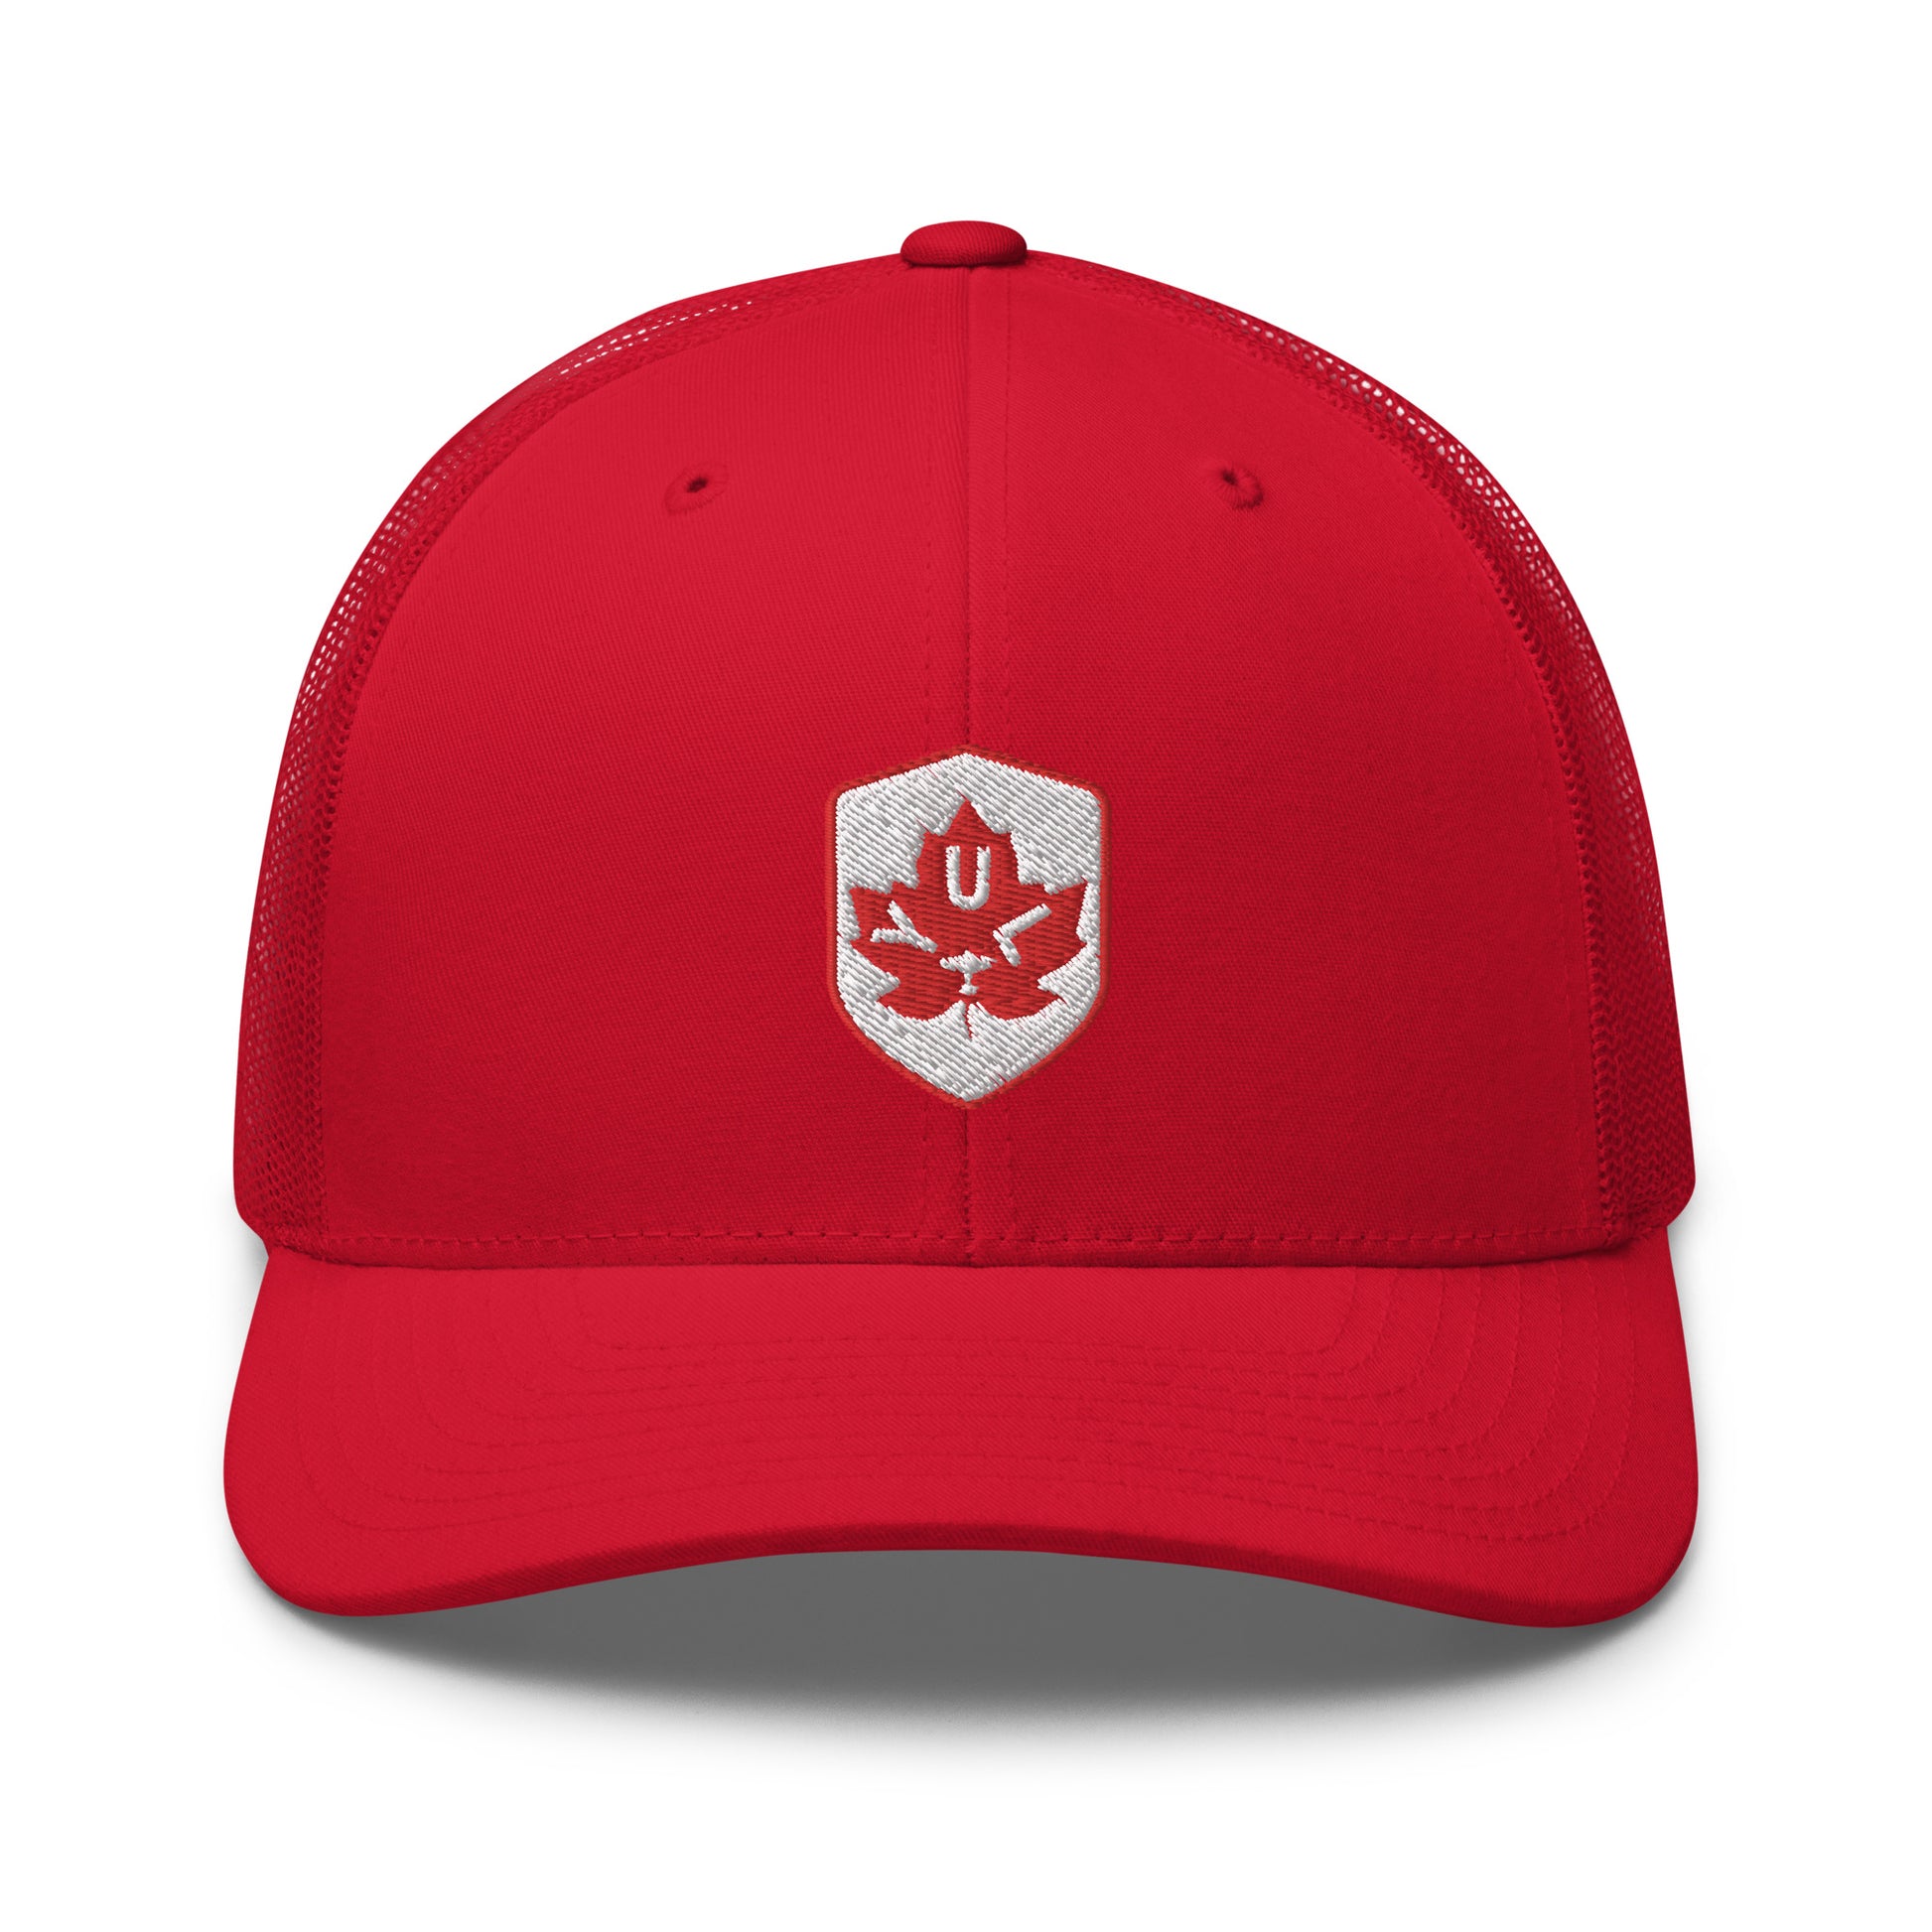 Maple Leaf Trucker Hat - Red/White • YUL Montreal • YHM Designs - Image 23